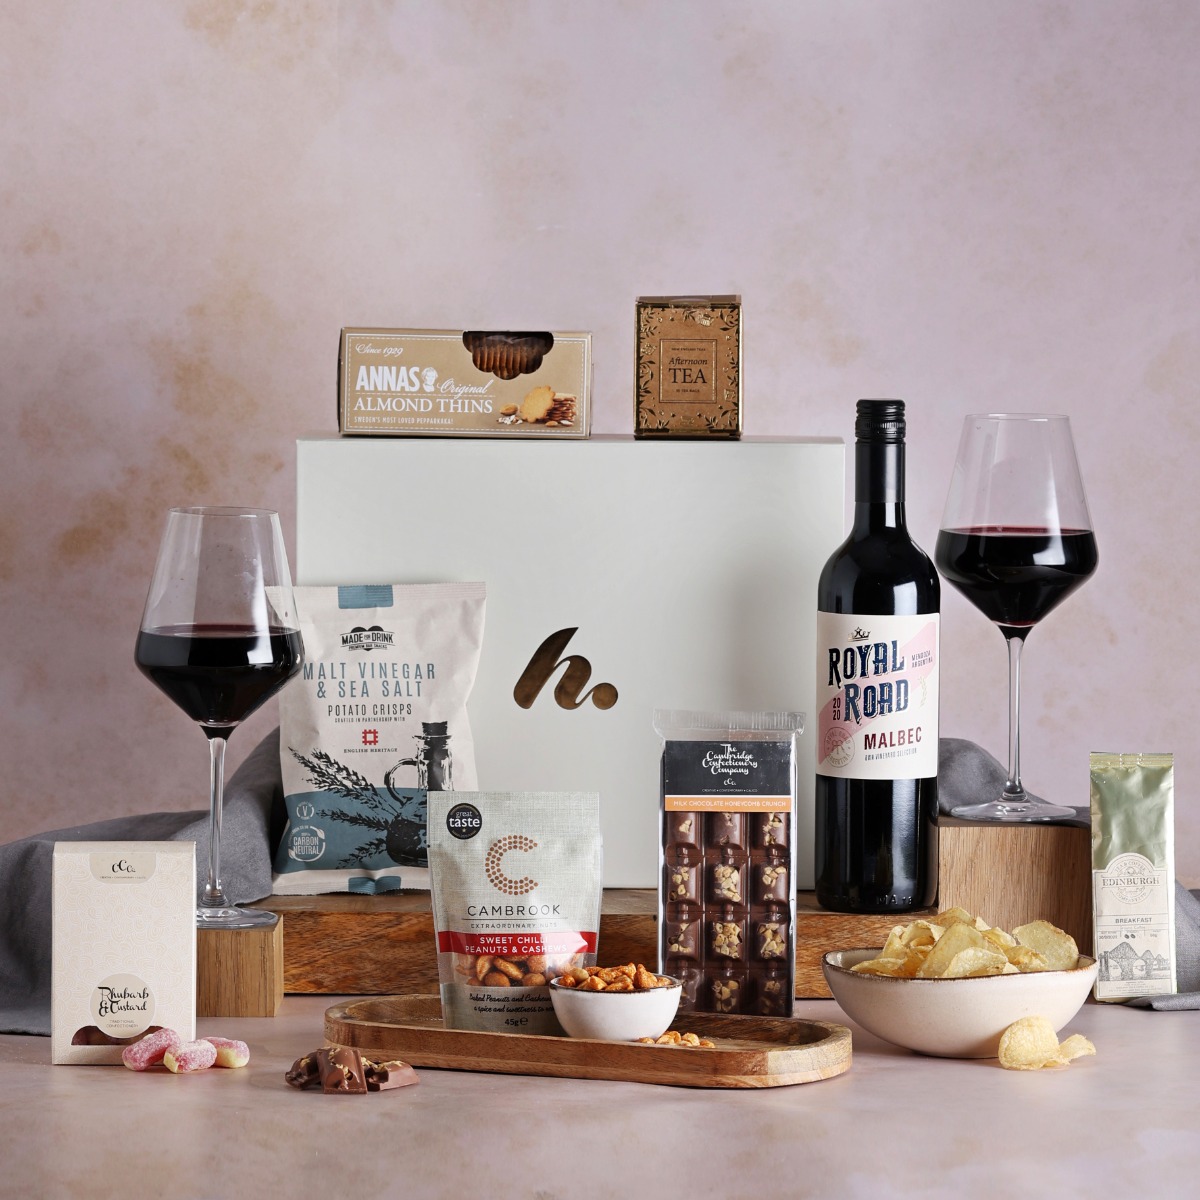  The Classic Food & Wine Hamper with contents on display